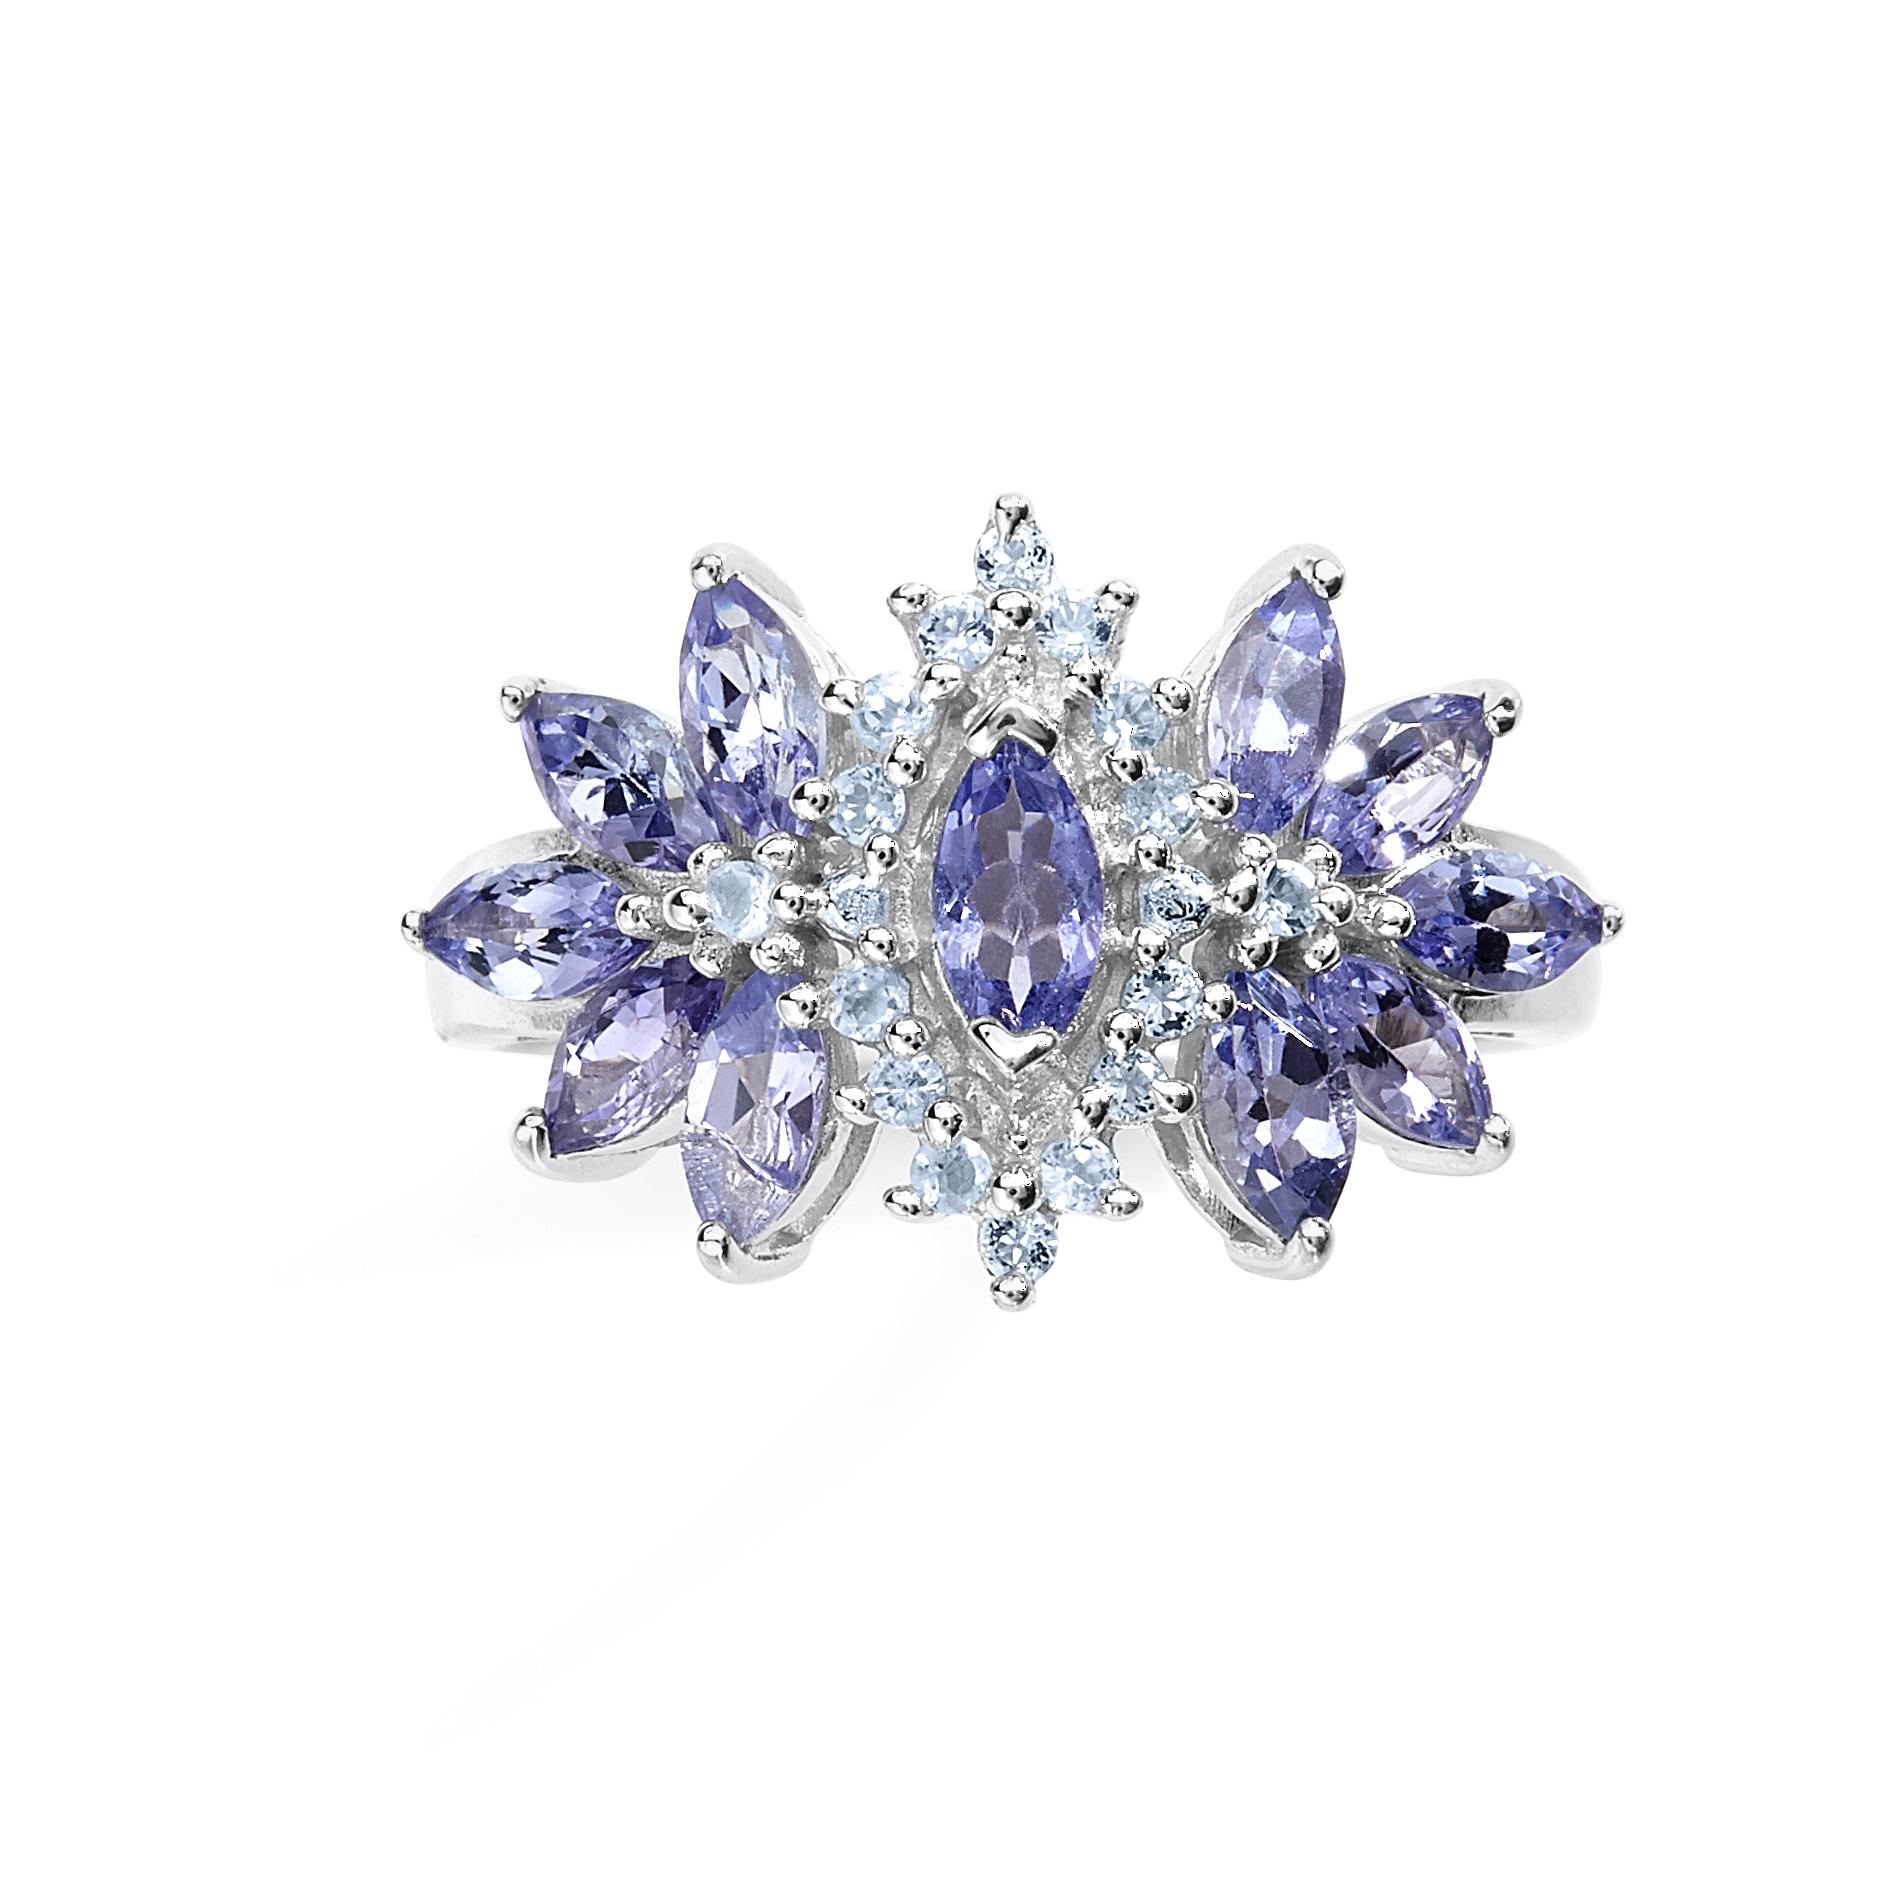 1-1/2 Cttw Marquise Cut Sterling Silver Tanzanite and White Topaz Ring